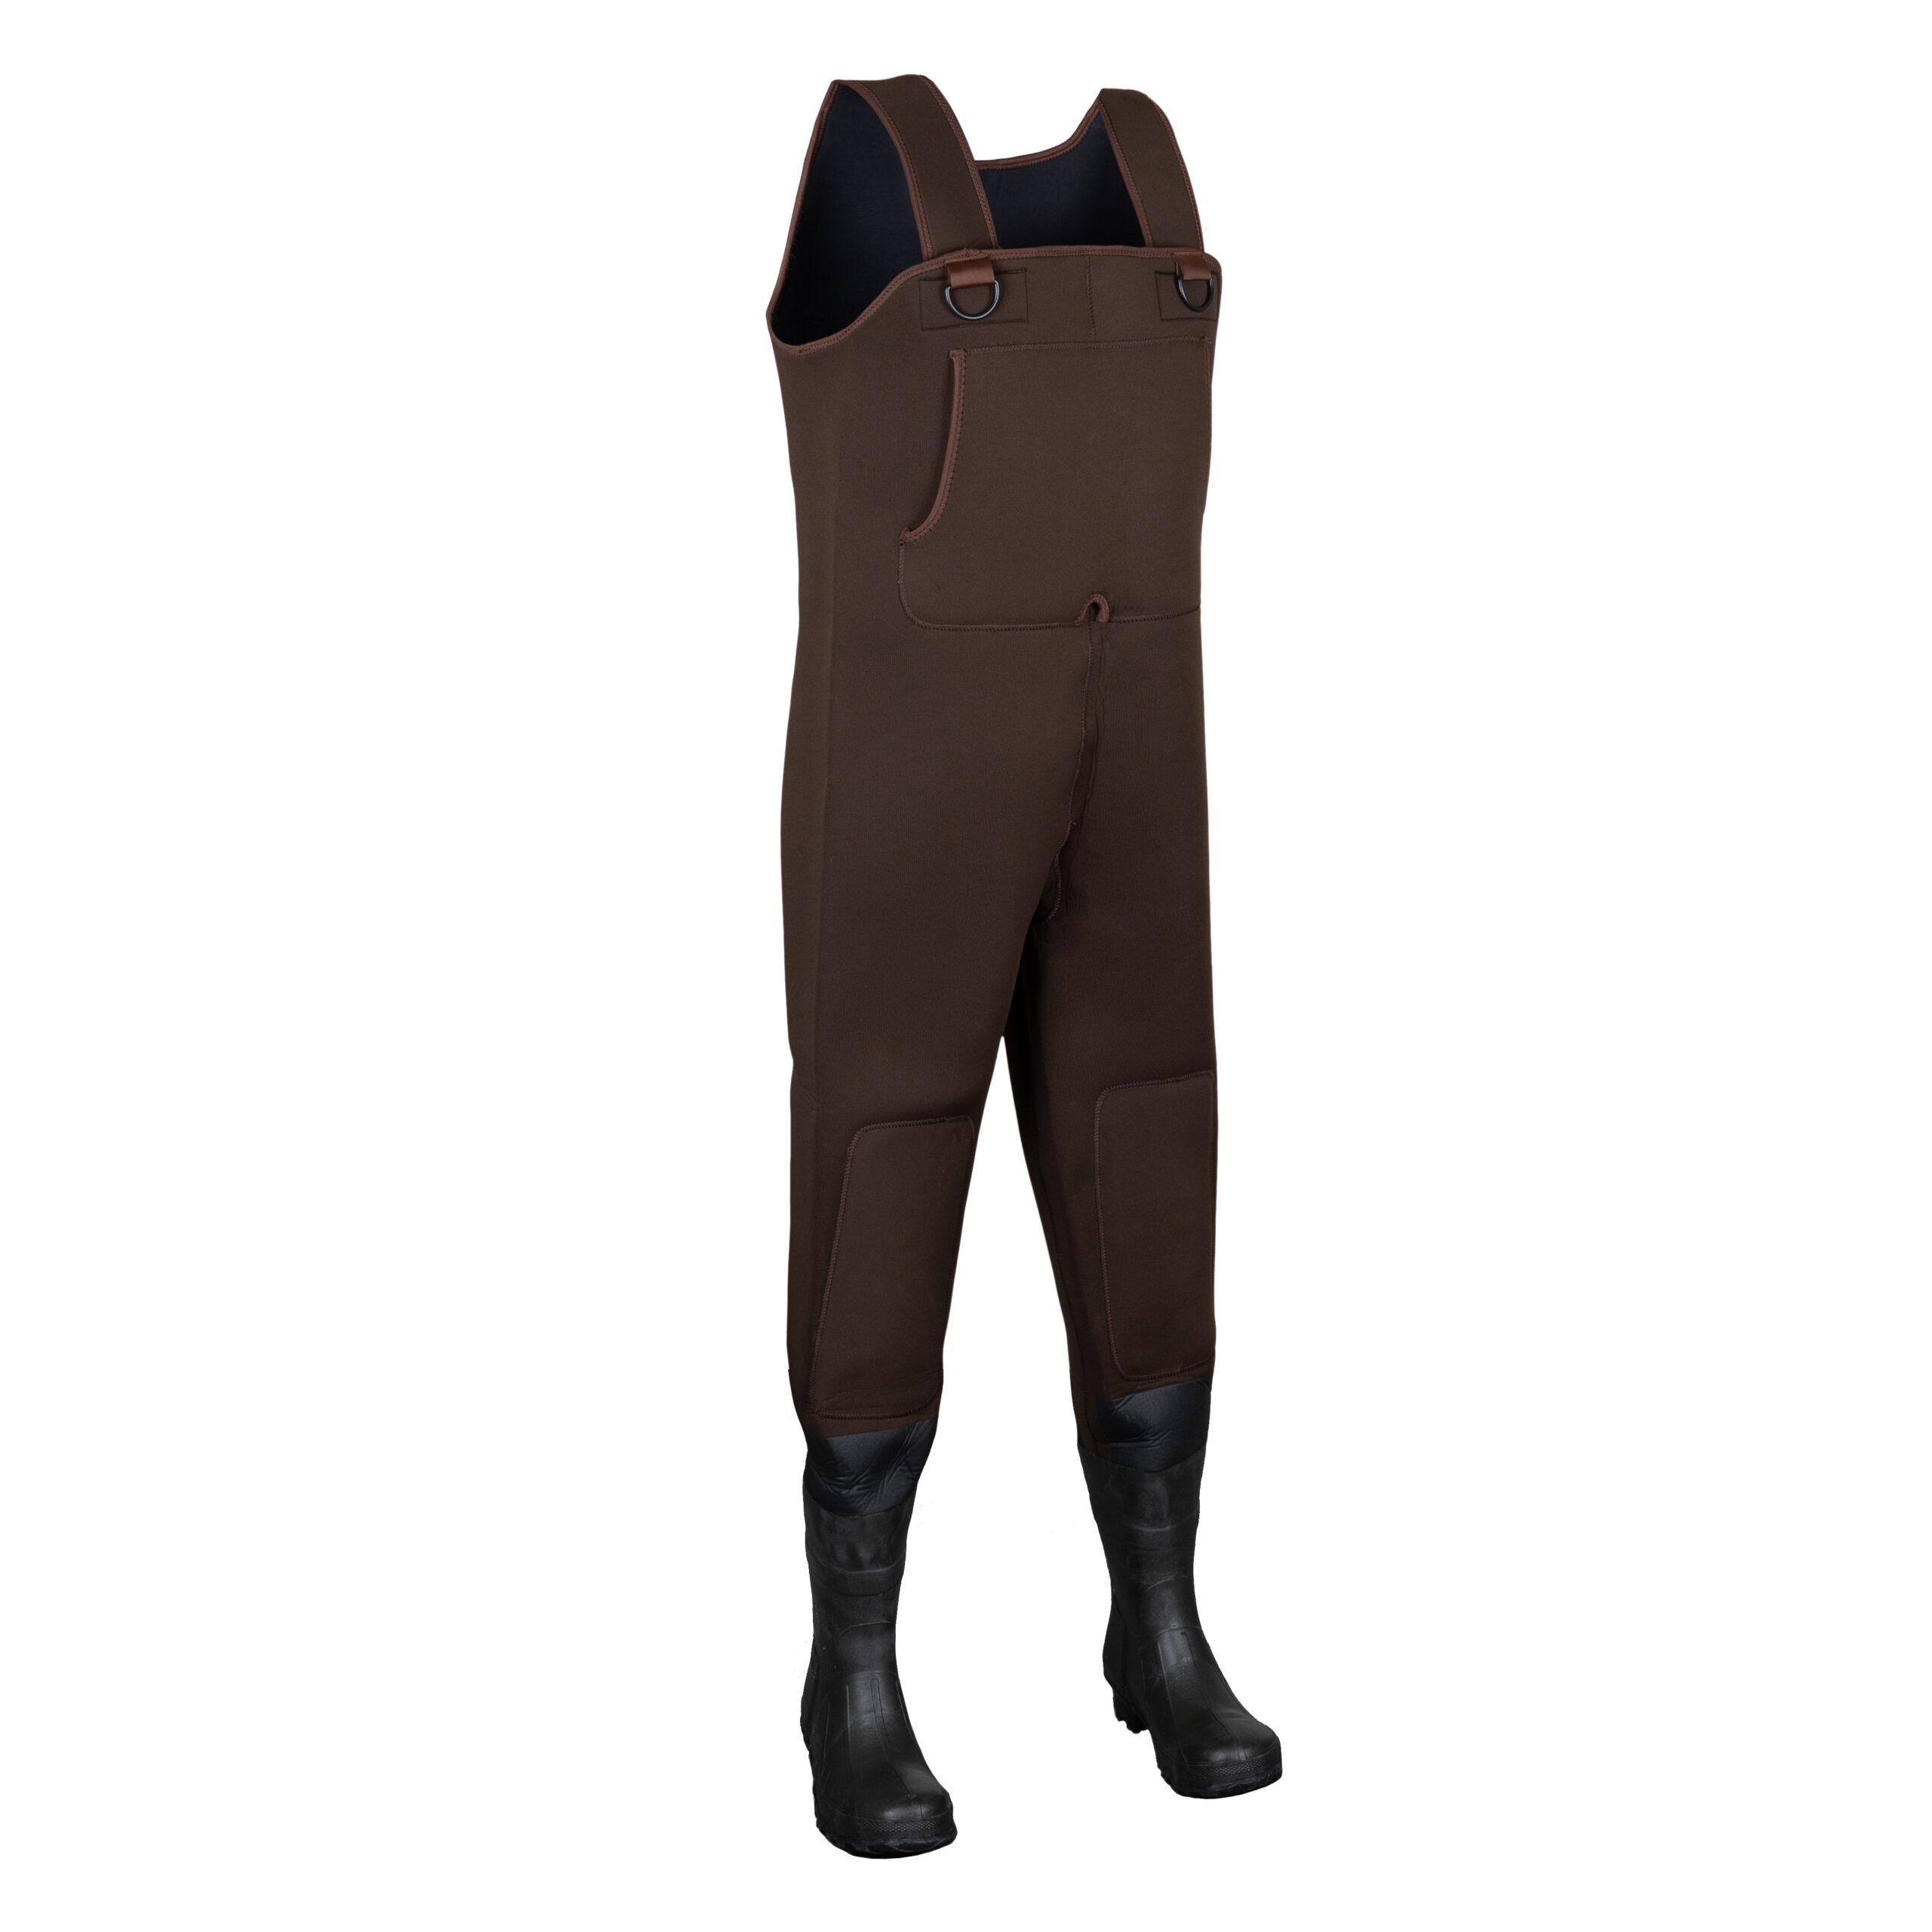 NEOPRENE CHEST WADER WITH BOOTS - Boots